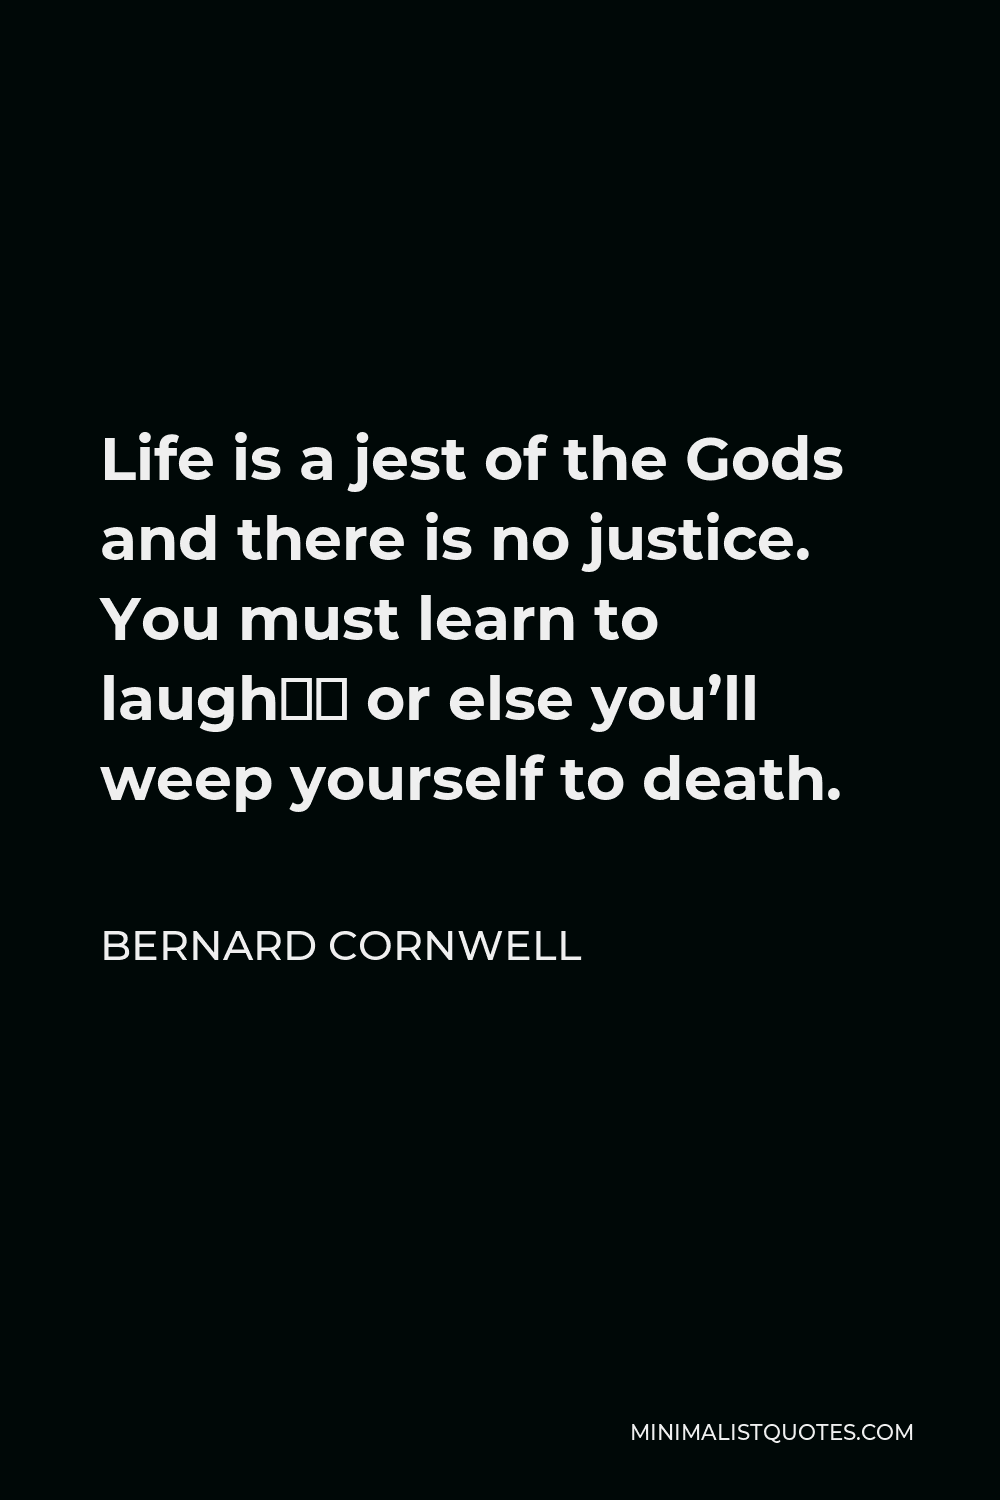 Bernard Cornwell Quote - Life is a jest of the Gods and there is no justice. You must learn to laugh… or else you’ll weep yourself to death.